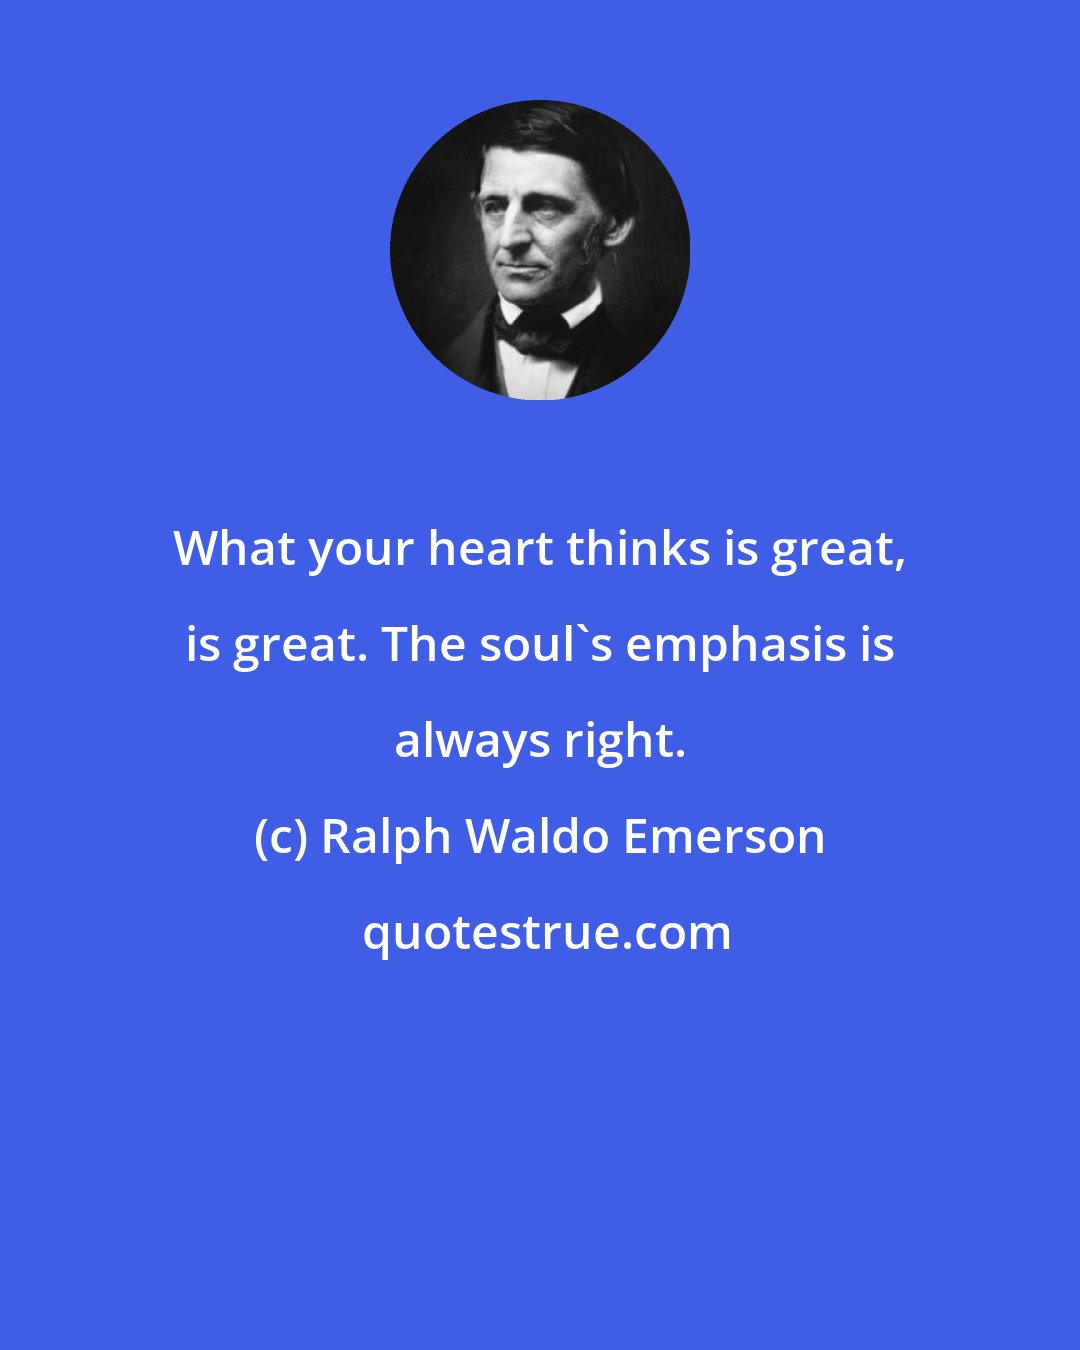 Ralph Waldo Emerson: What your heart thinks is great, is great. The soul's emphasis is always right.